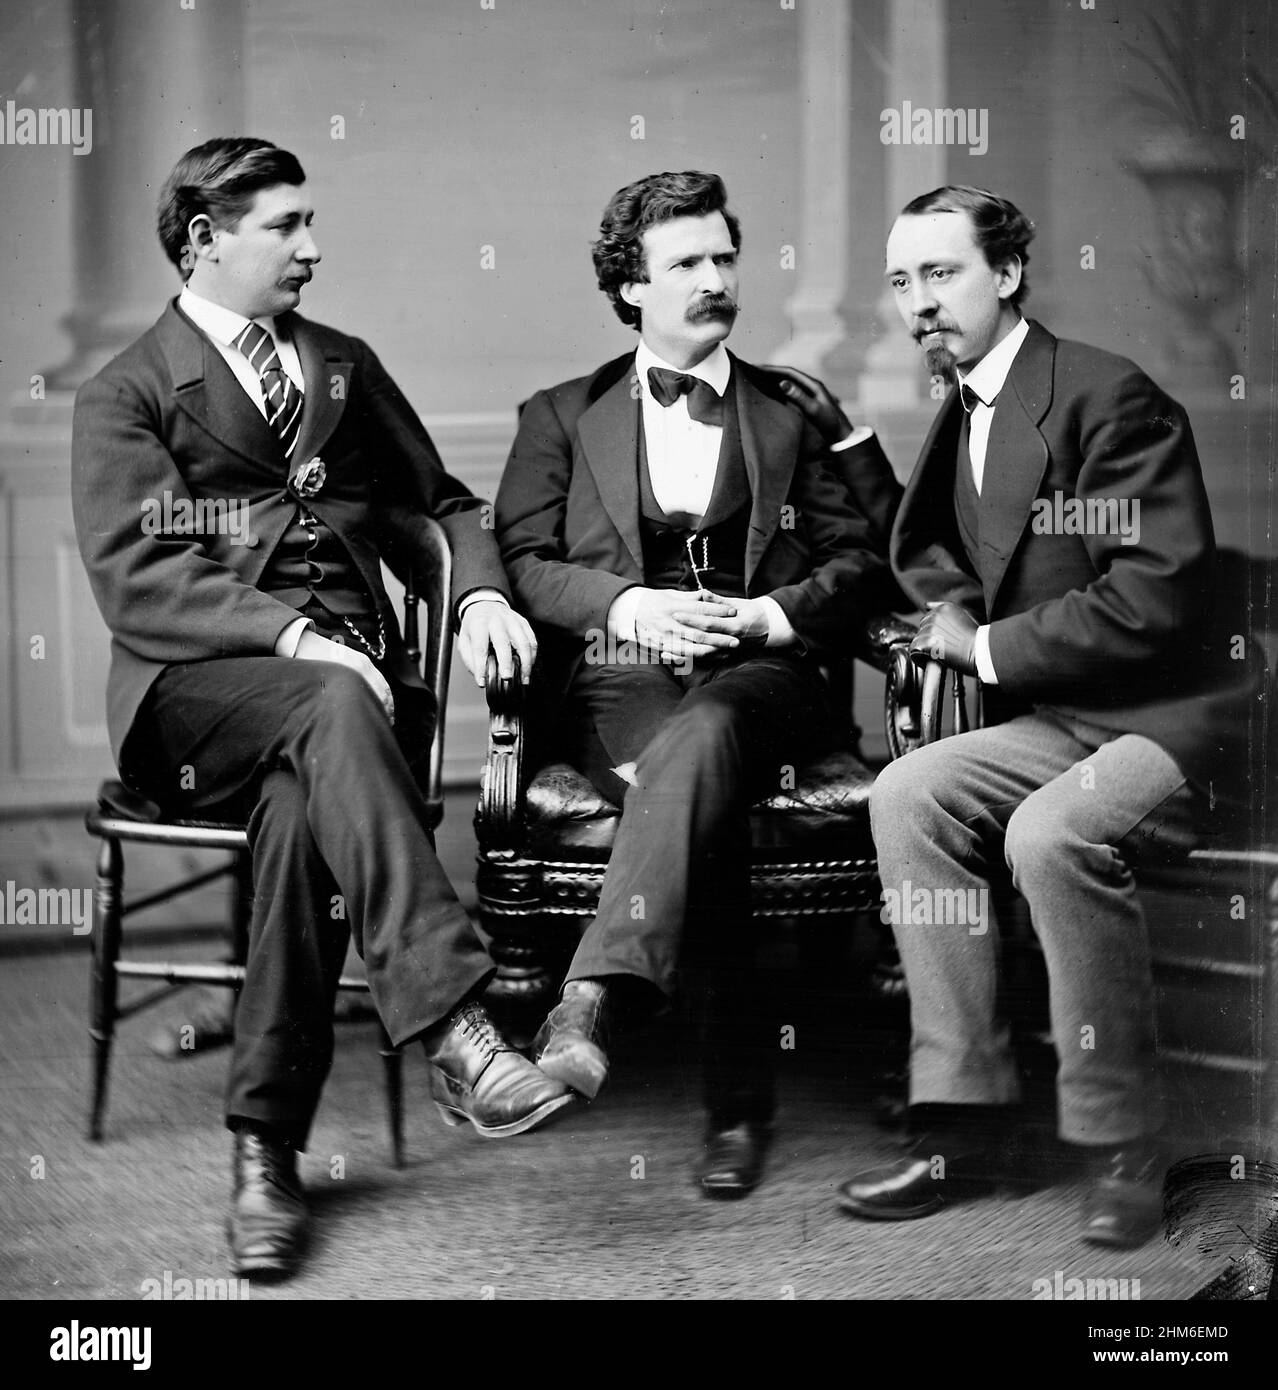 The american writer Mark Twain (real name Samuel Clemens), author of Tom Sawyer and Huckleberry Finn. Photo from 1871 when he was 36. He is with American Civil War correspondent and author George Alfred Townsend, and David Gray, editor of the rival Buffalo Courier Stock Photo